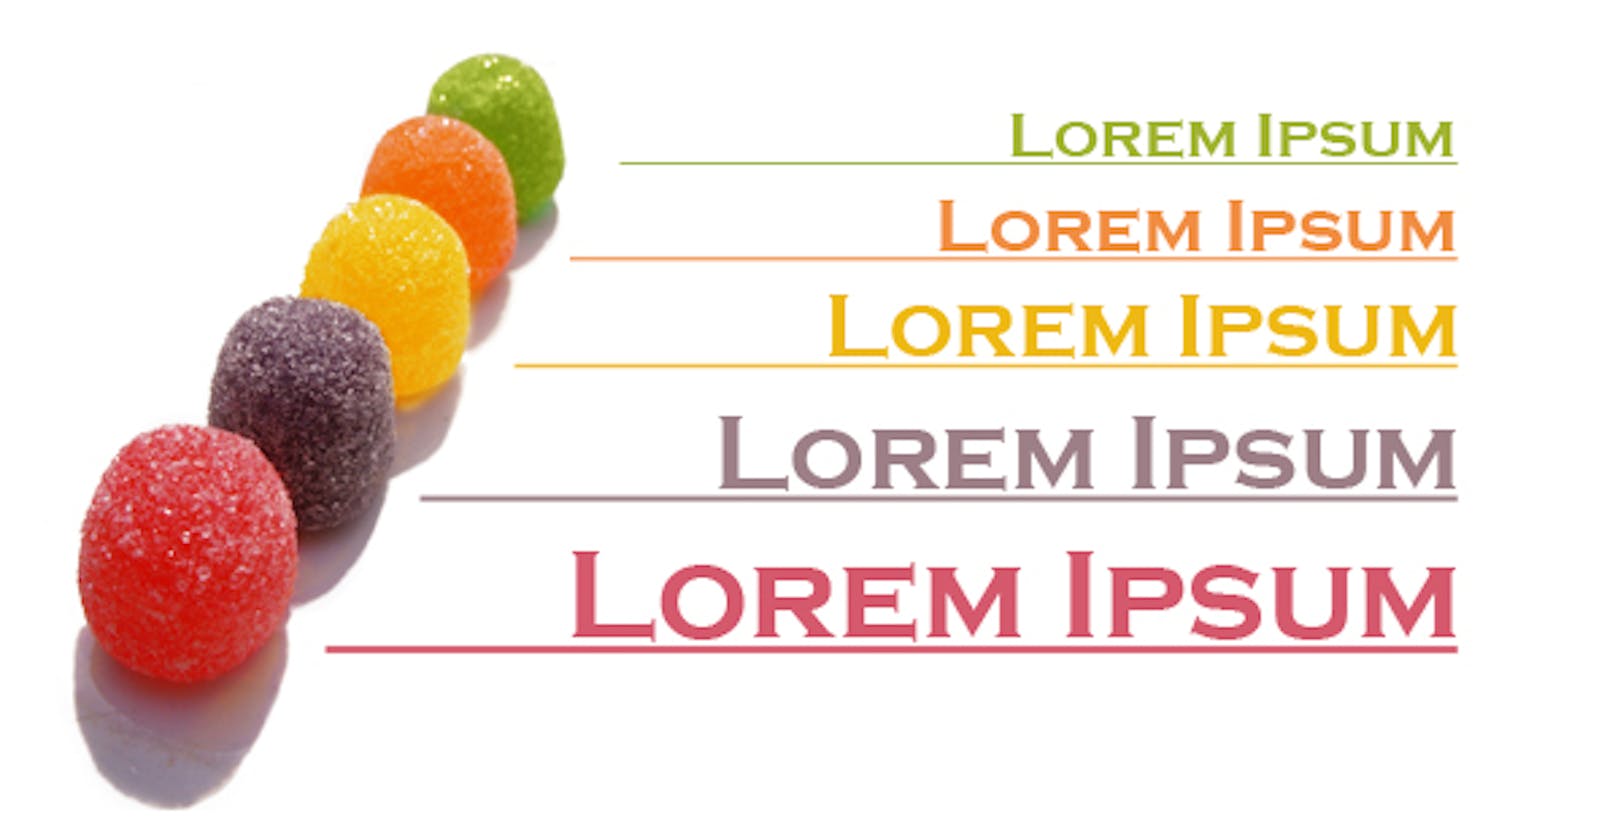 Lorem Ipsum: For programmers and otherwise.